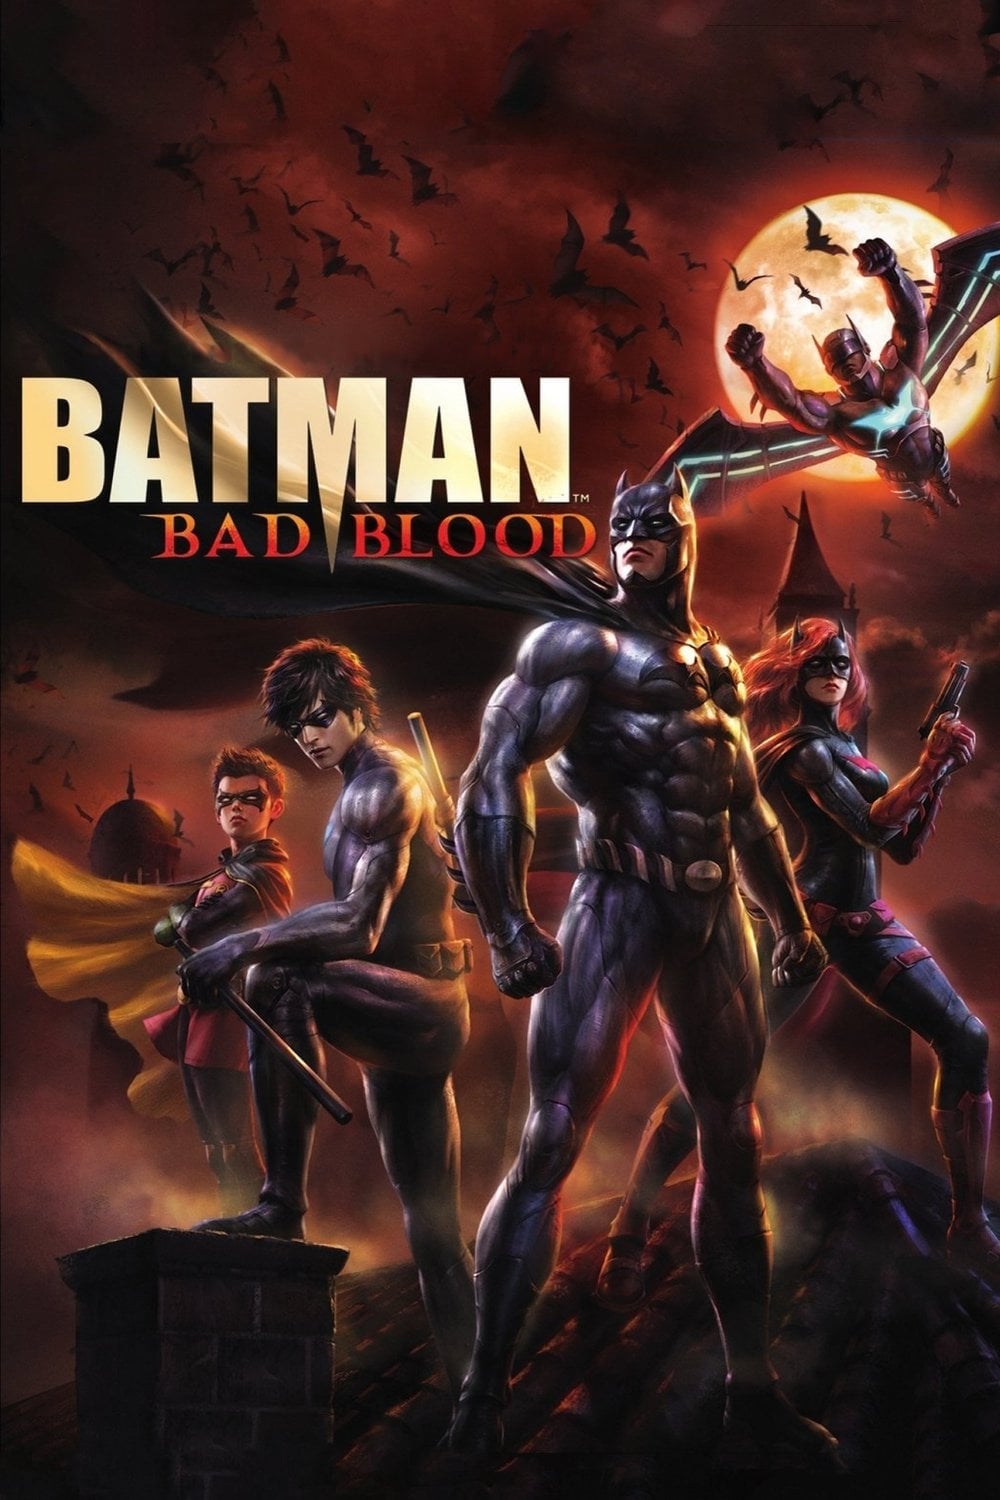 Poster for the movie "Batman: Bad Blood"